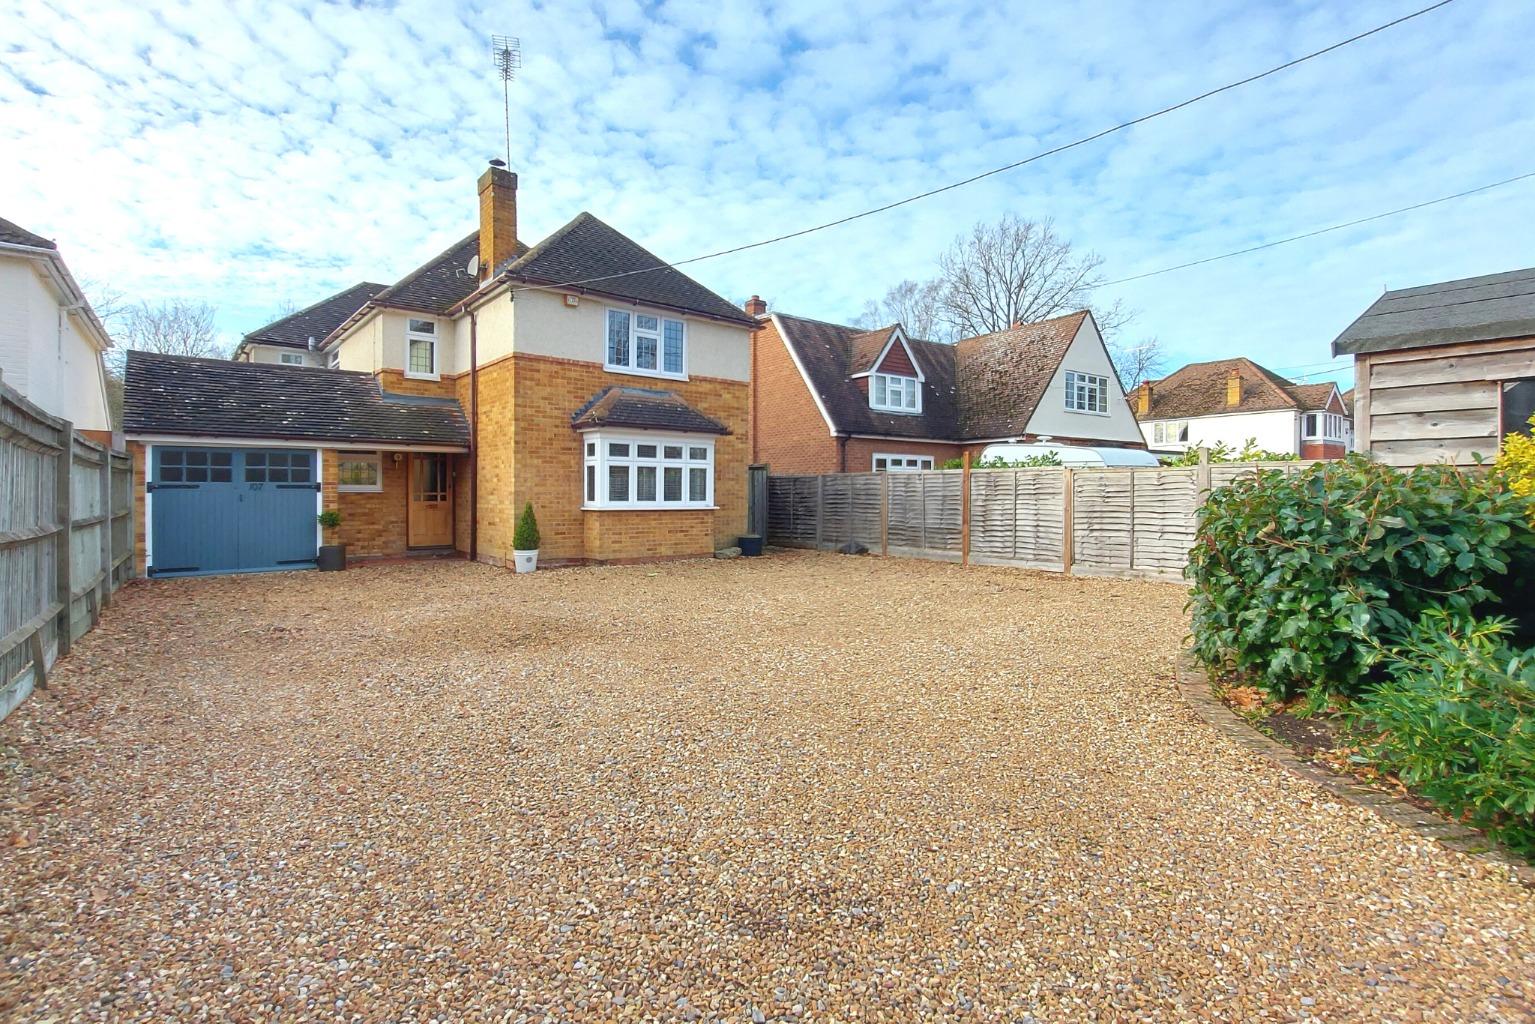 4 bed detached house for sale in Reading Road, Wokingham 0